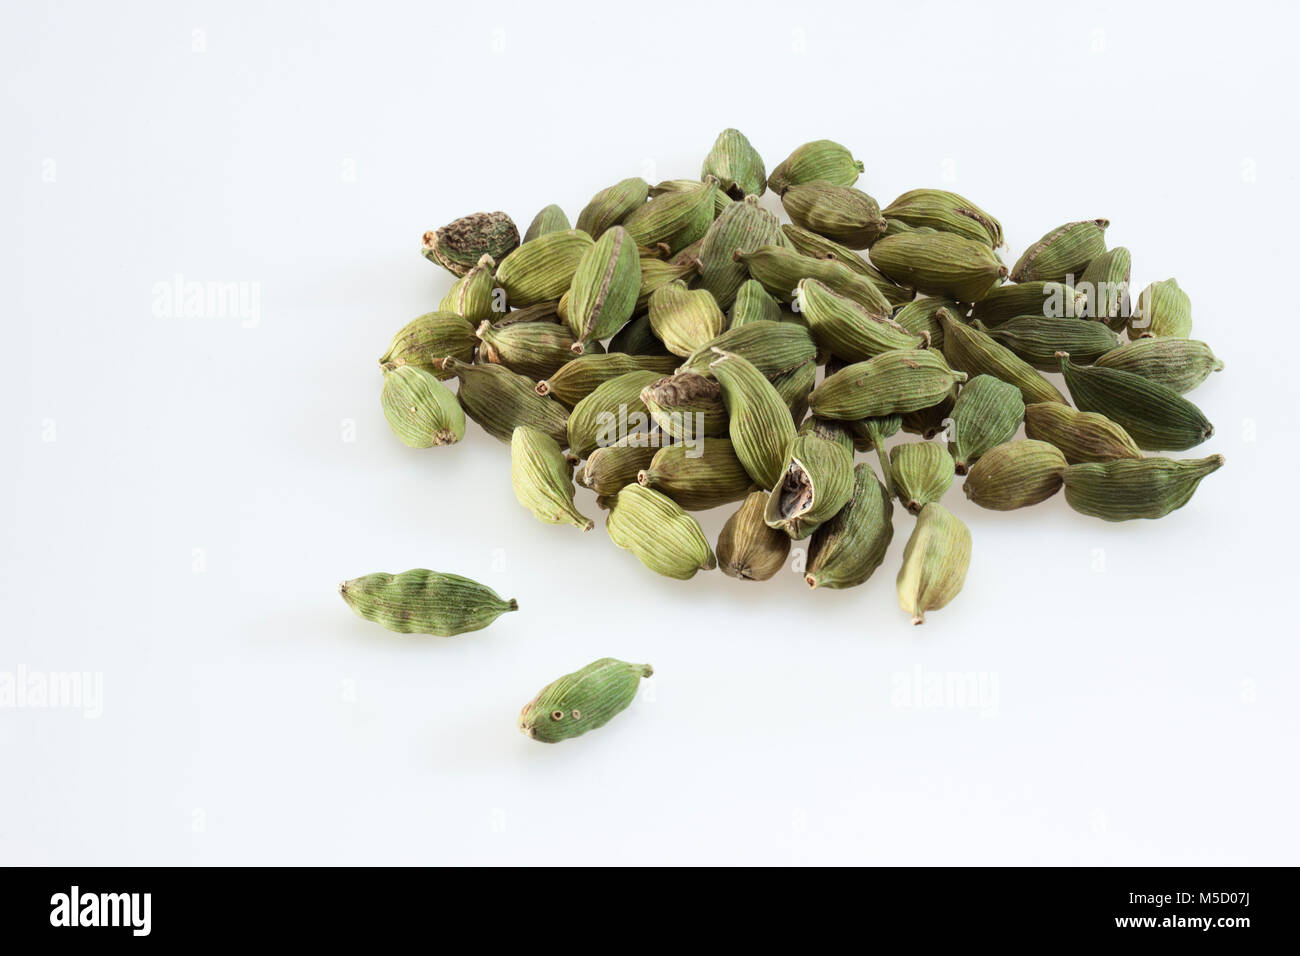 Green cardamom pods on a clean white background Stock Photo